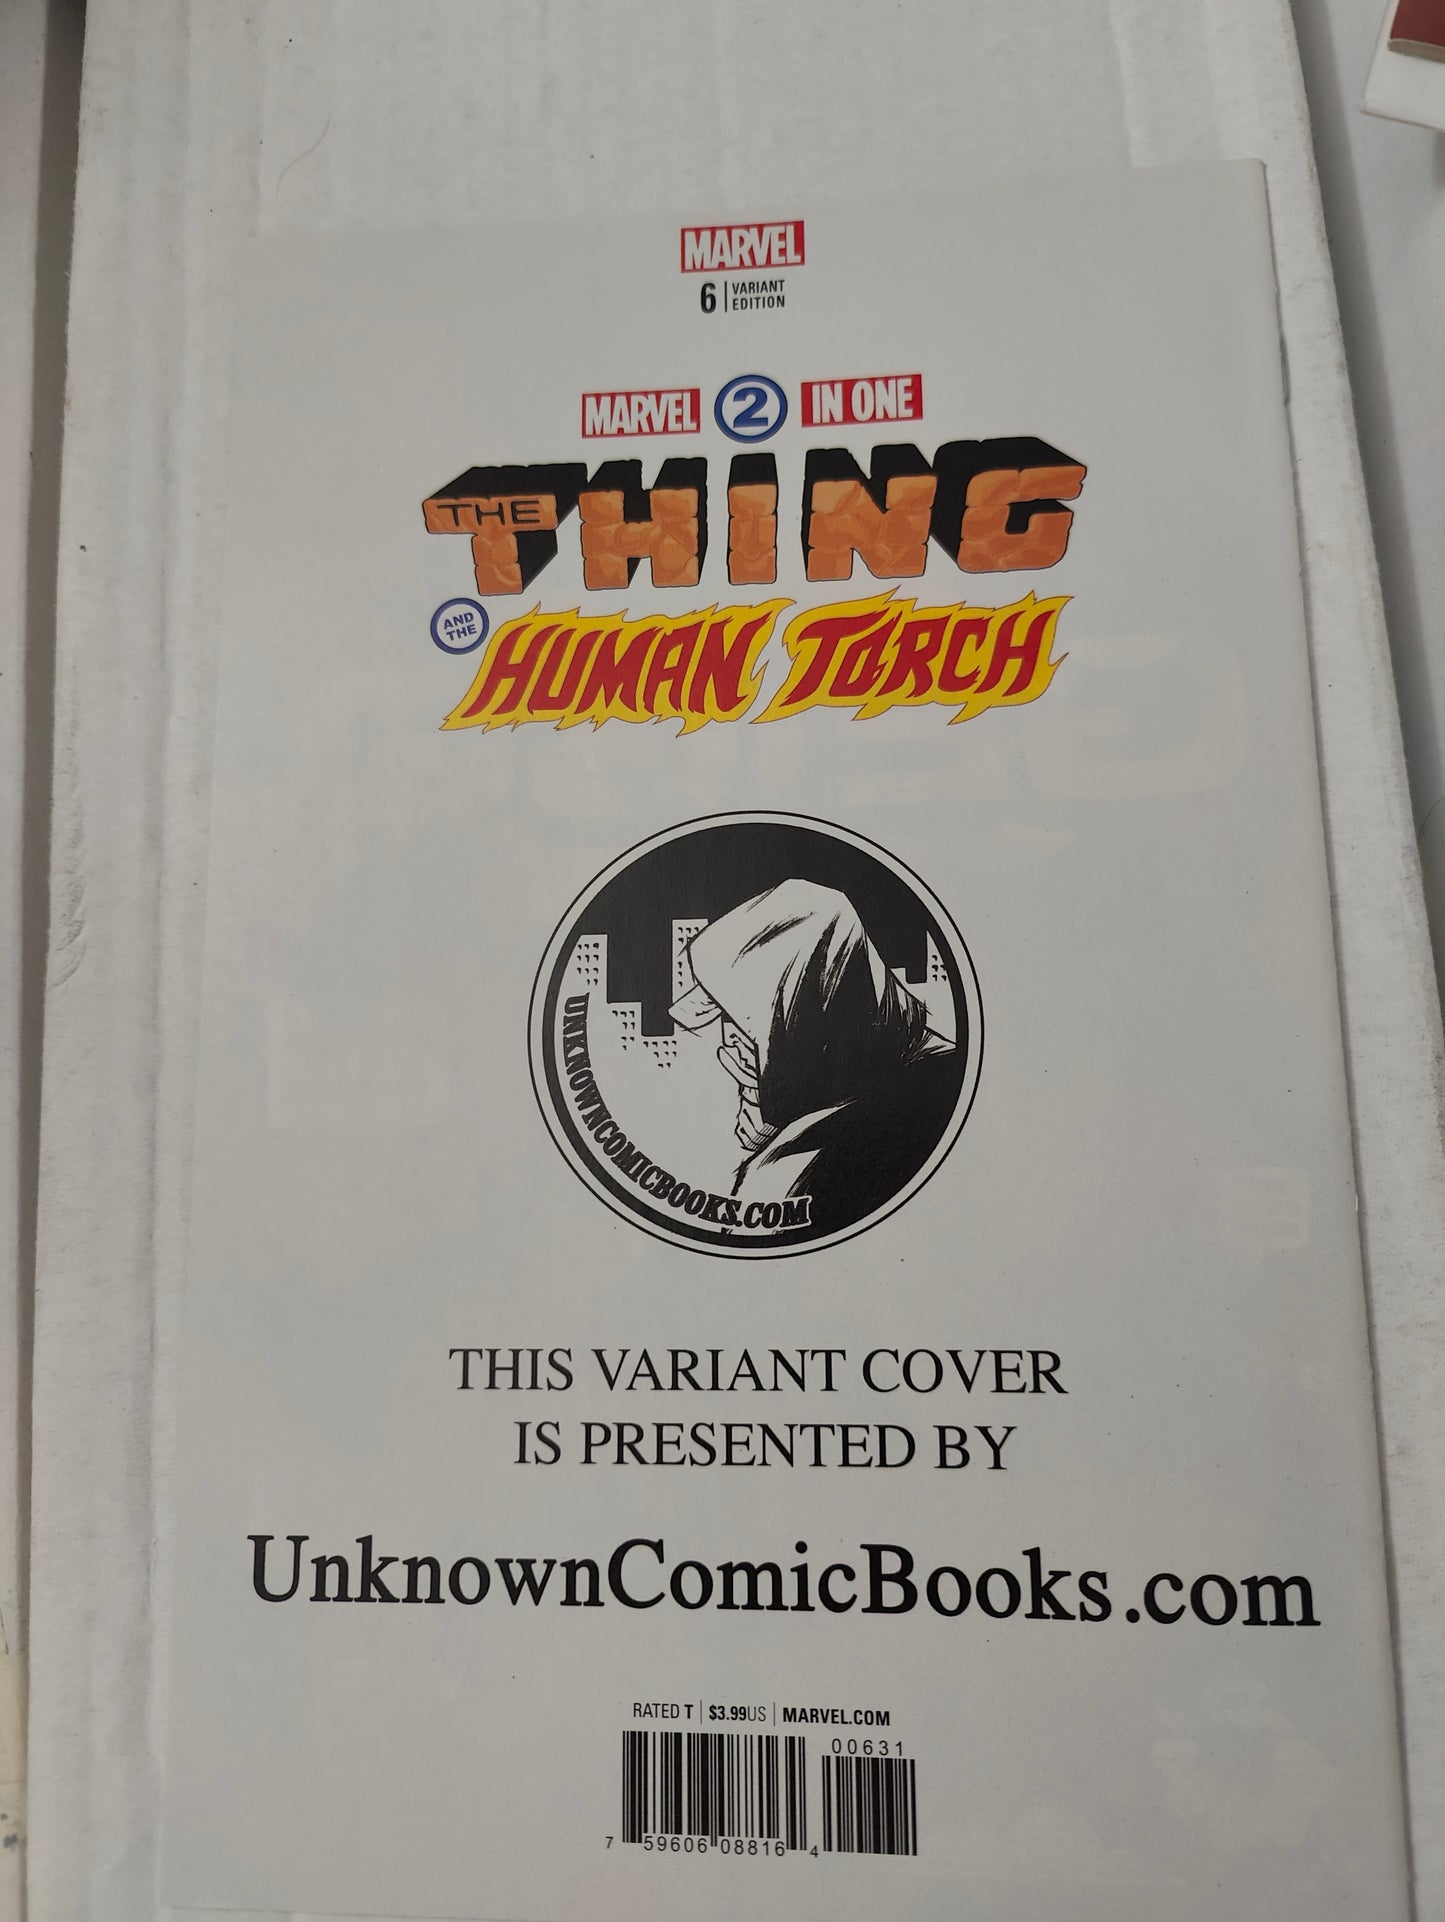 Marvel 2 in one Thing and the Human Torch #6